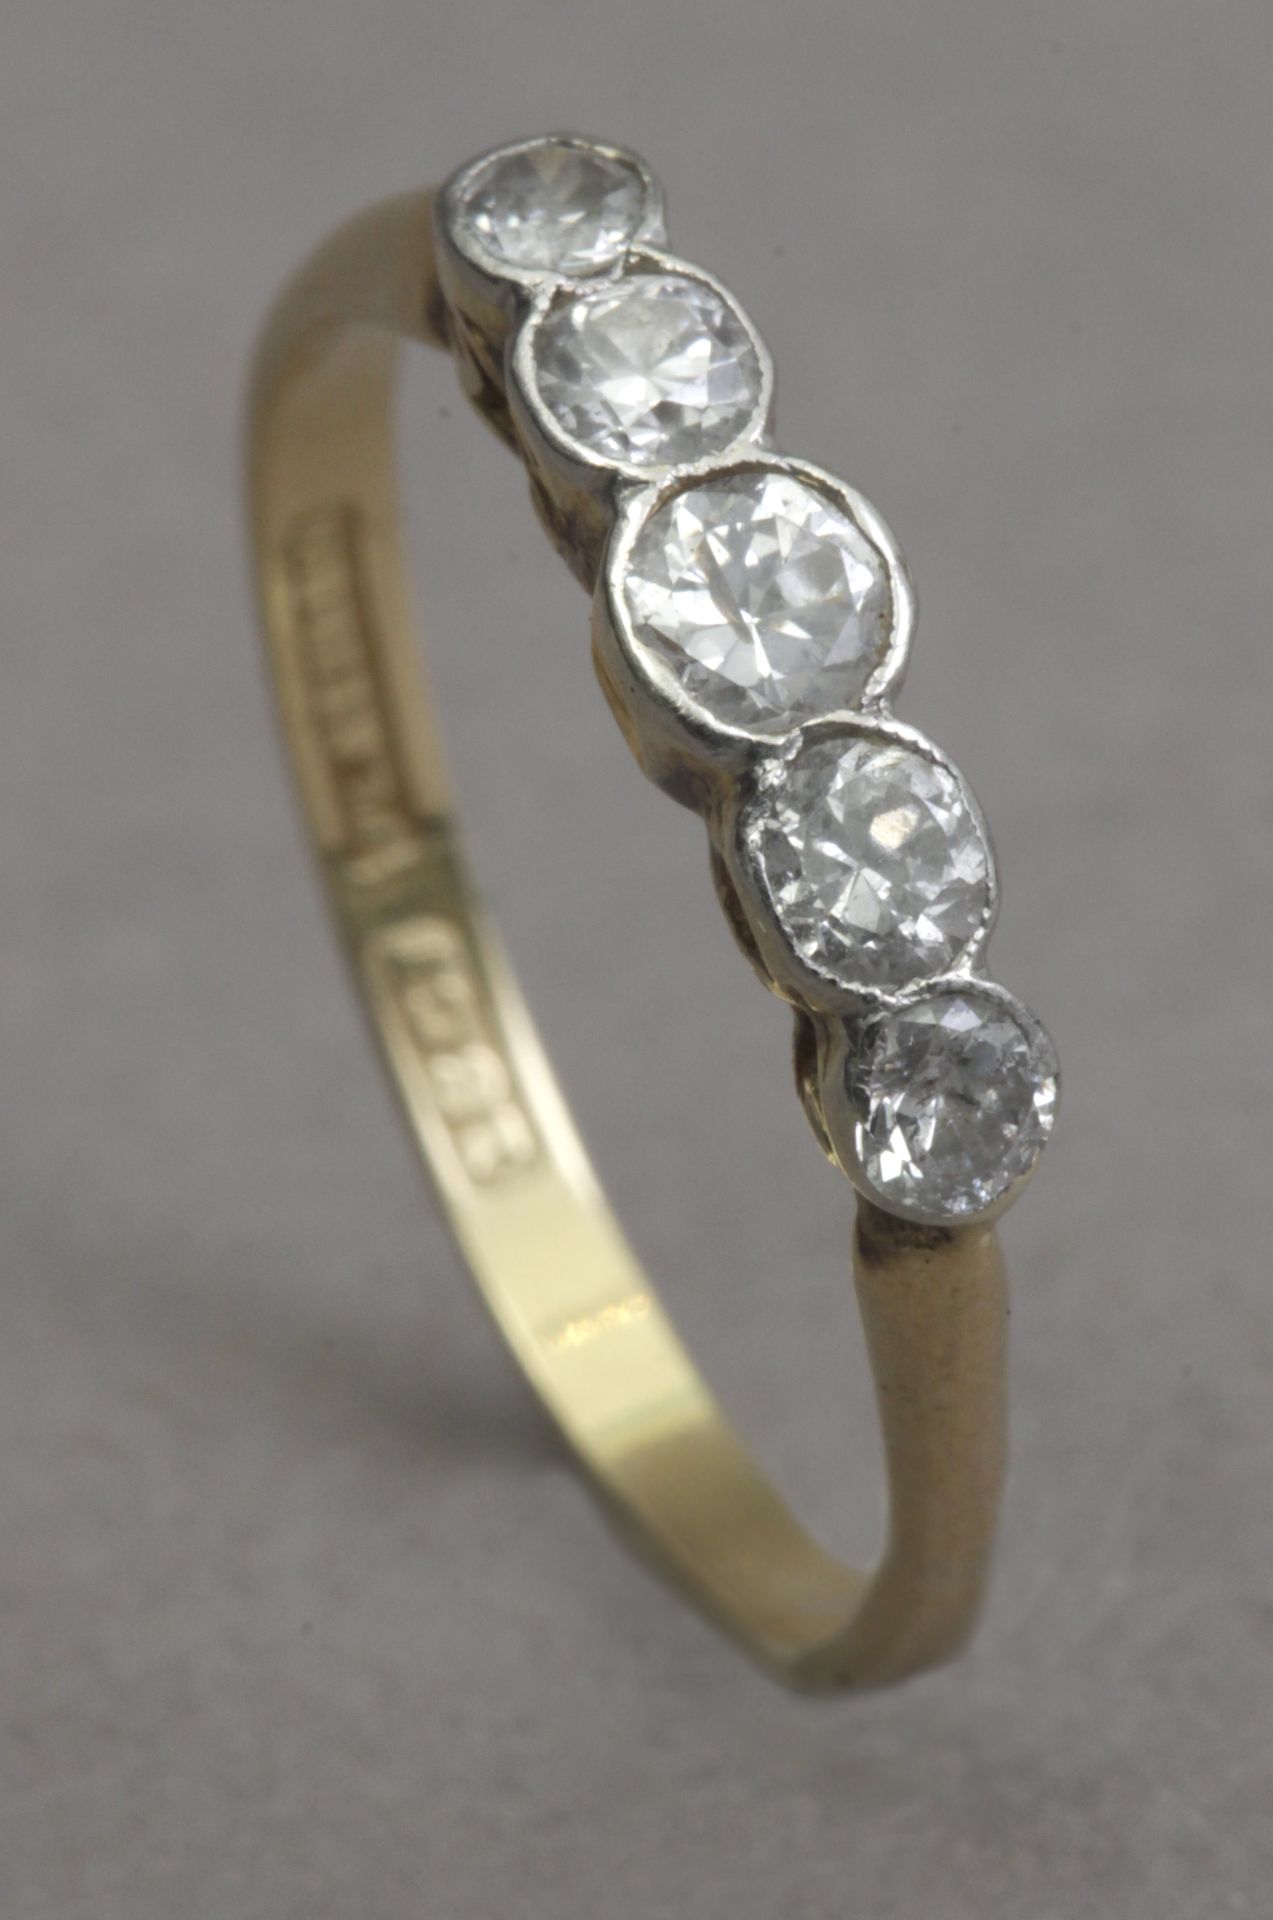 A first third of 20th century five stone diamond ring